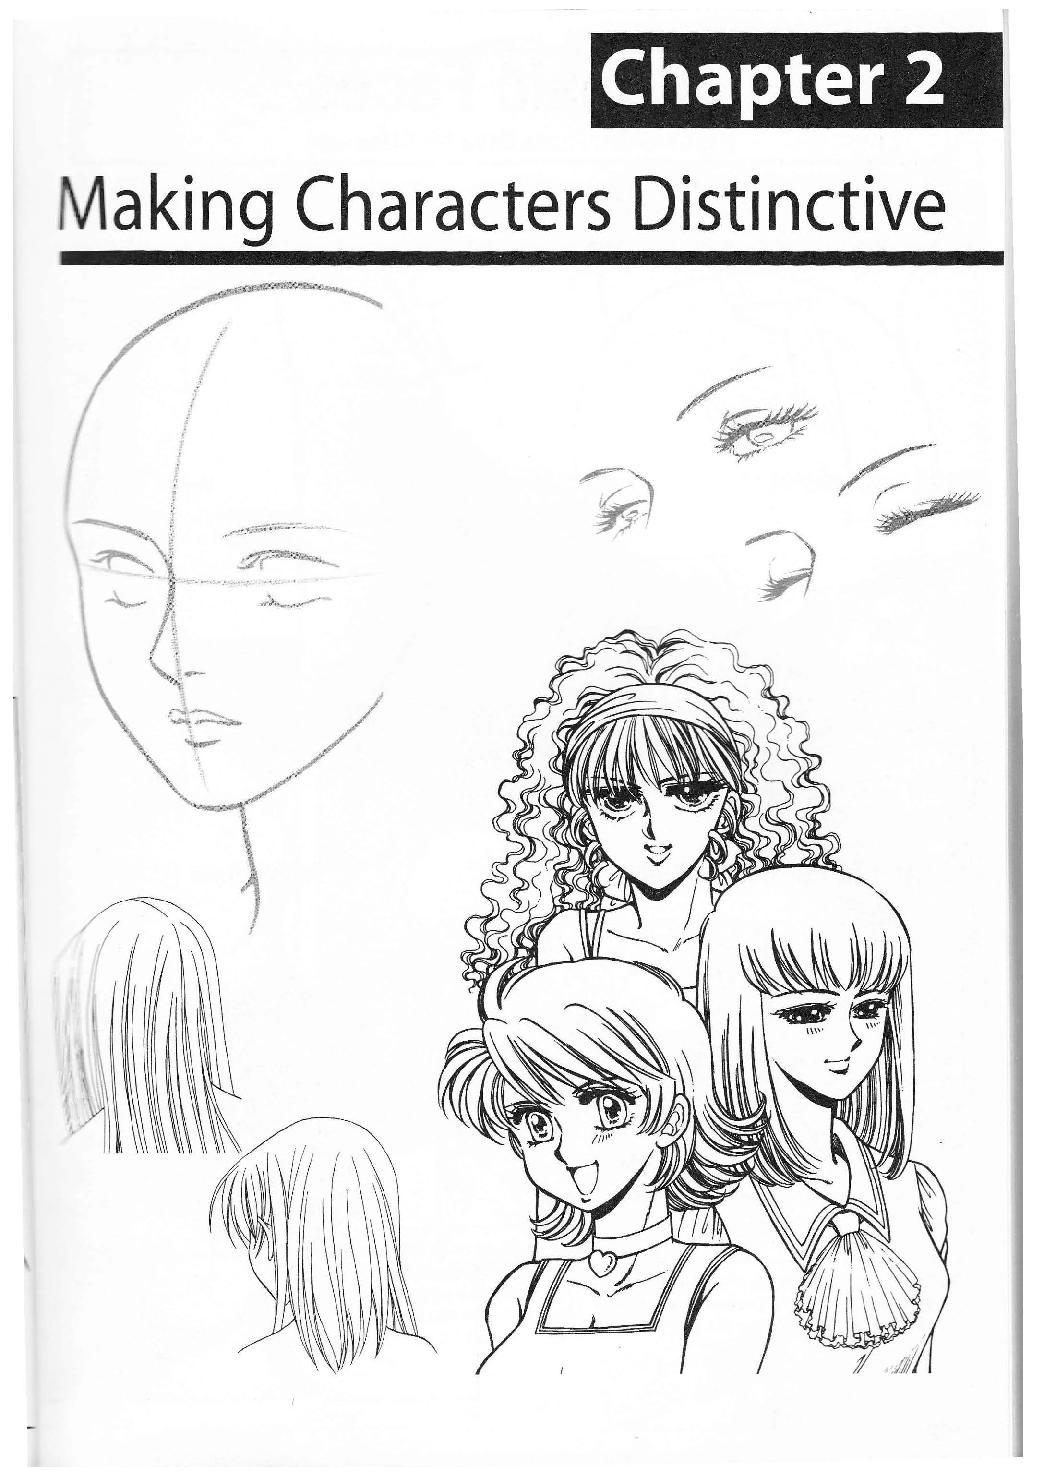 More How to Draw Manga Vol. 2 - Penning Characters 22